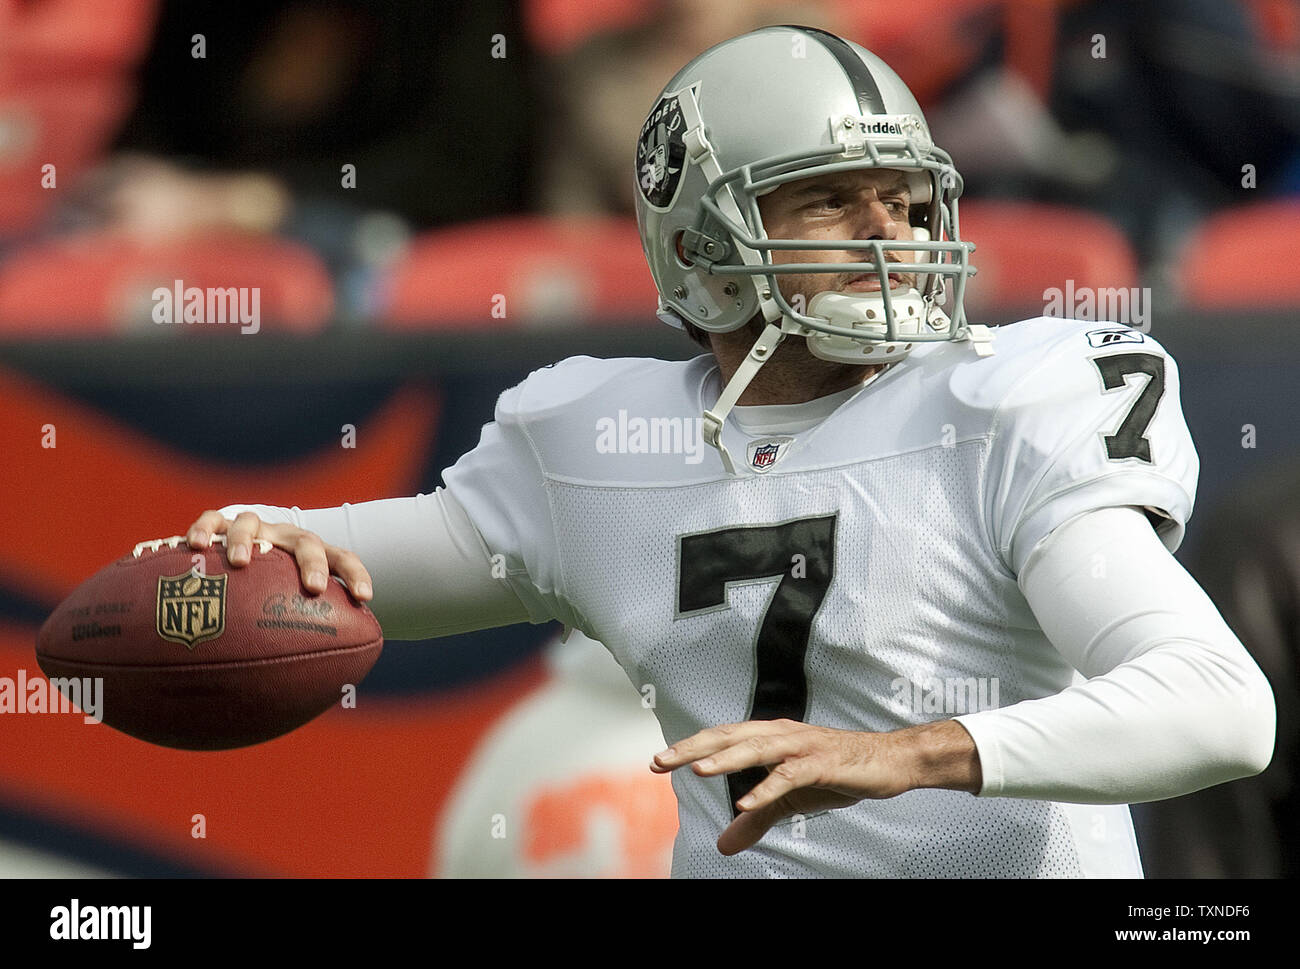 Oakland Raiders backup quarterback Kyle Boller warms up at Invesco Field at Mile High on October 24, 2010 in Denver.  Boller will start if Raiders quarterback Jason Campbell is unable to play against the Denver Broncos.           UPI/Gary C. Caskey Stock Photo